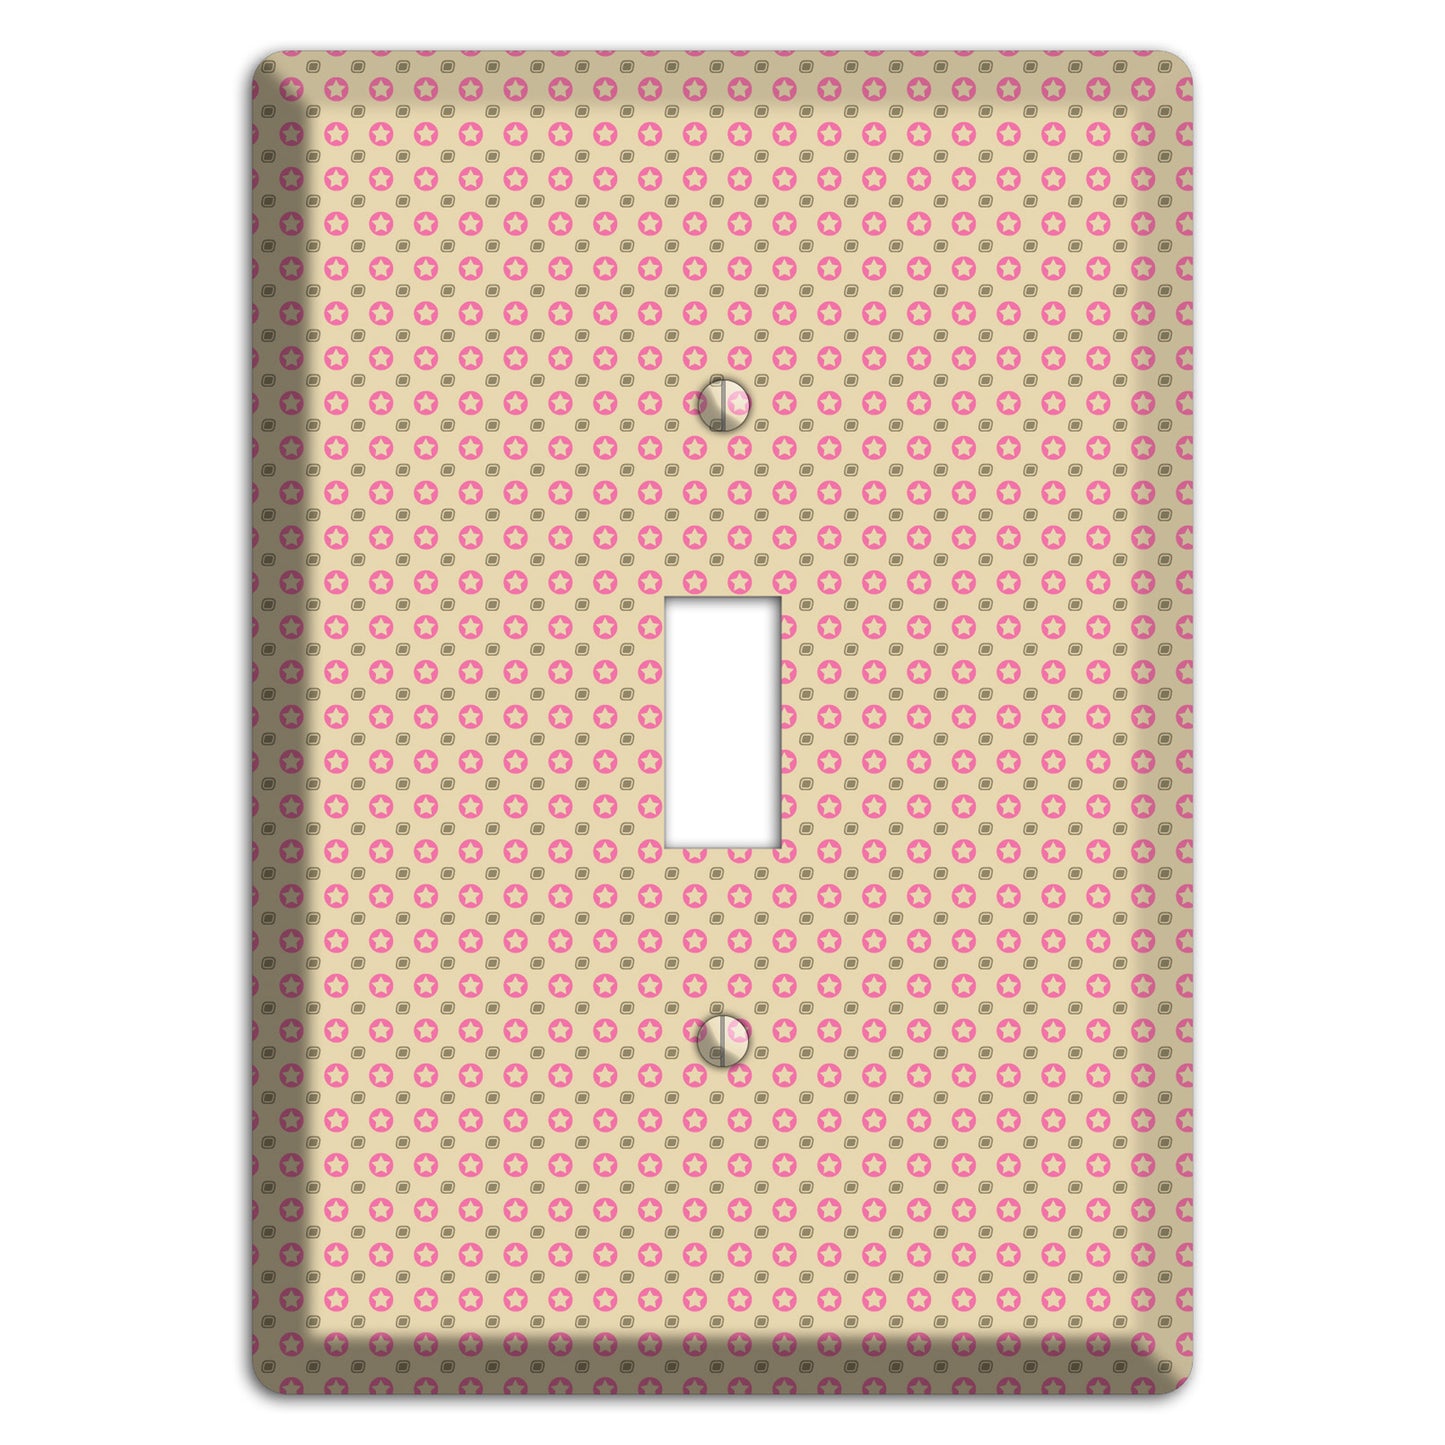 Beige with Pink Stars Cover Plates